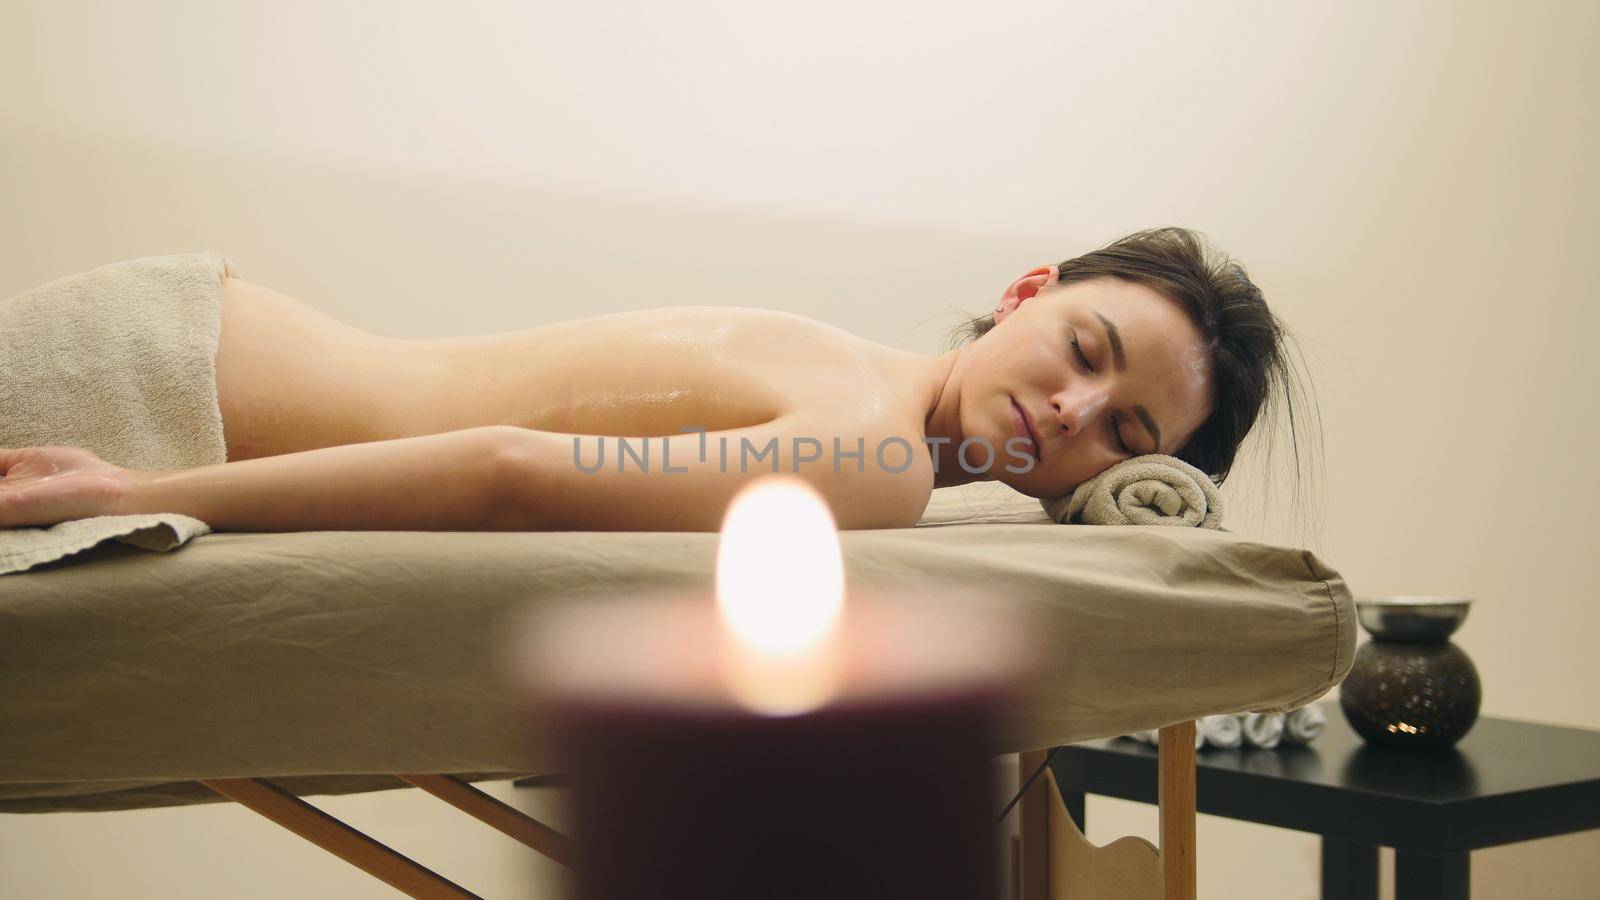 Oil relax massage - half nude young female on parlor, spa concept by Studia72